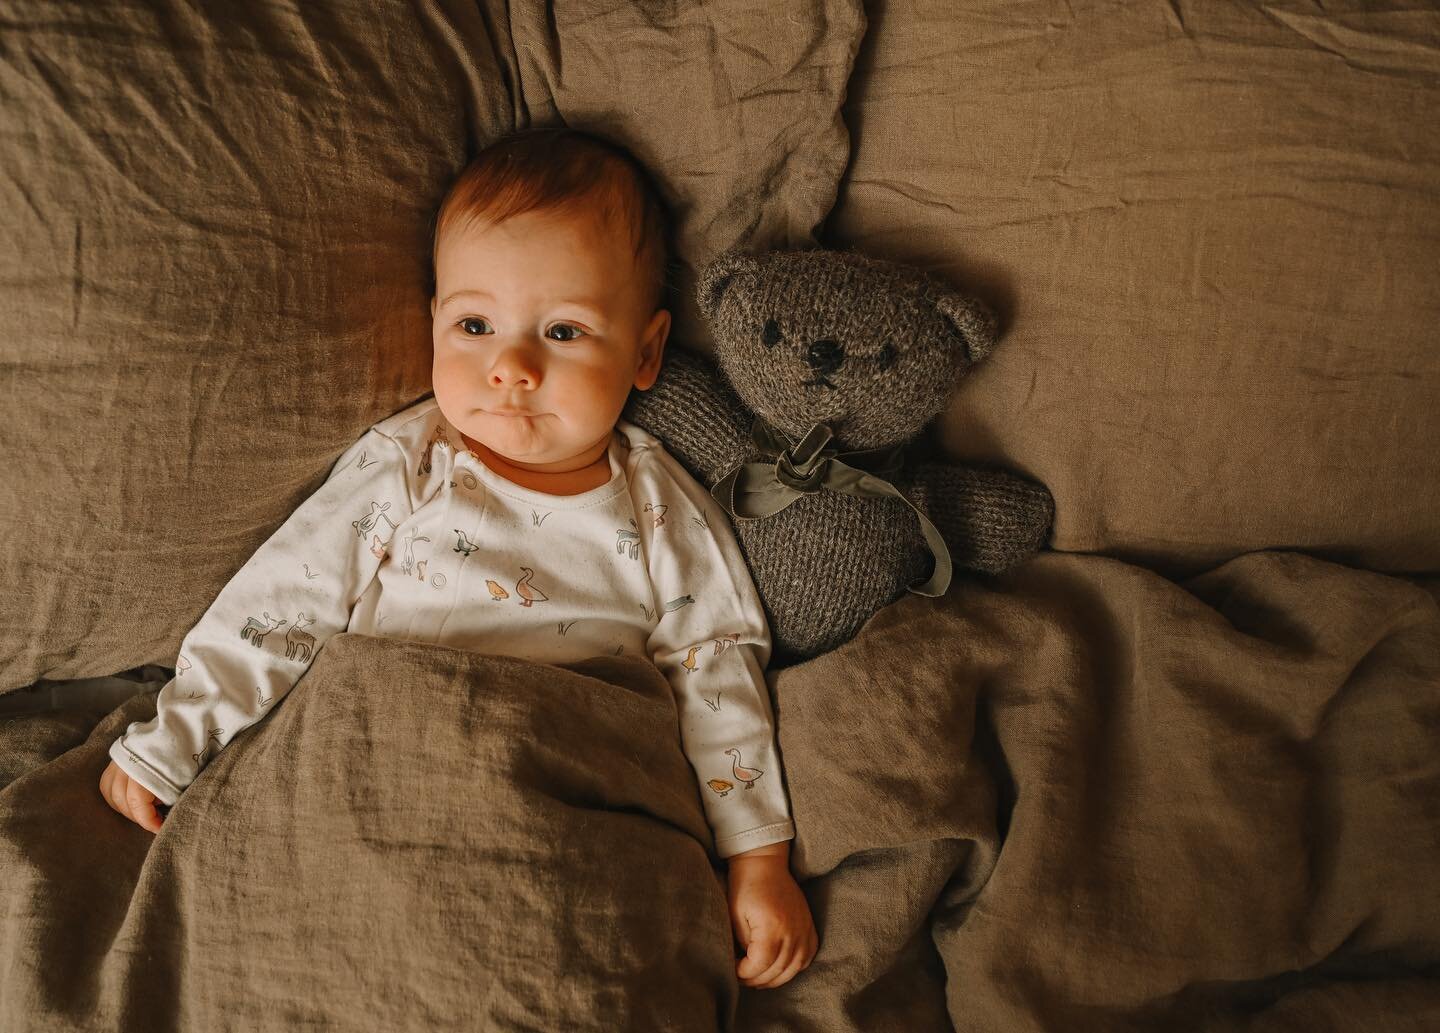 That&rsquo;s what we do on rainy days 📸 Happy 9 months Maxim! You are my inspiration 🎞 handmade bear 🐻 with love from auntie @becca.dunham cuties pj gifted by our generous and kind family friend @ivanchica @pehr